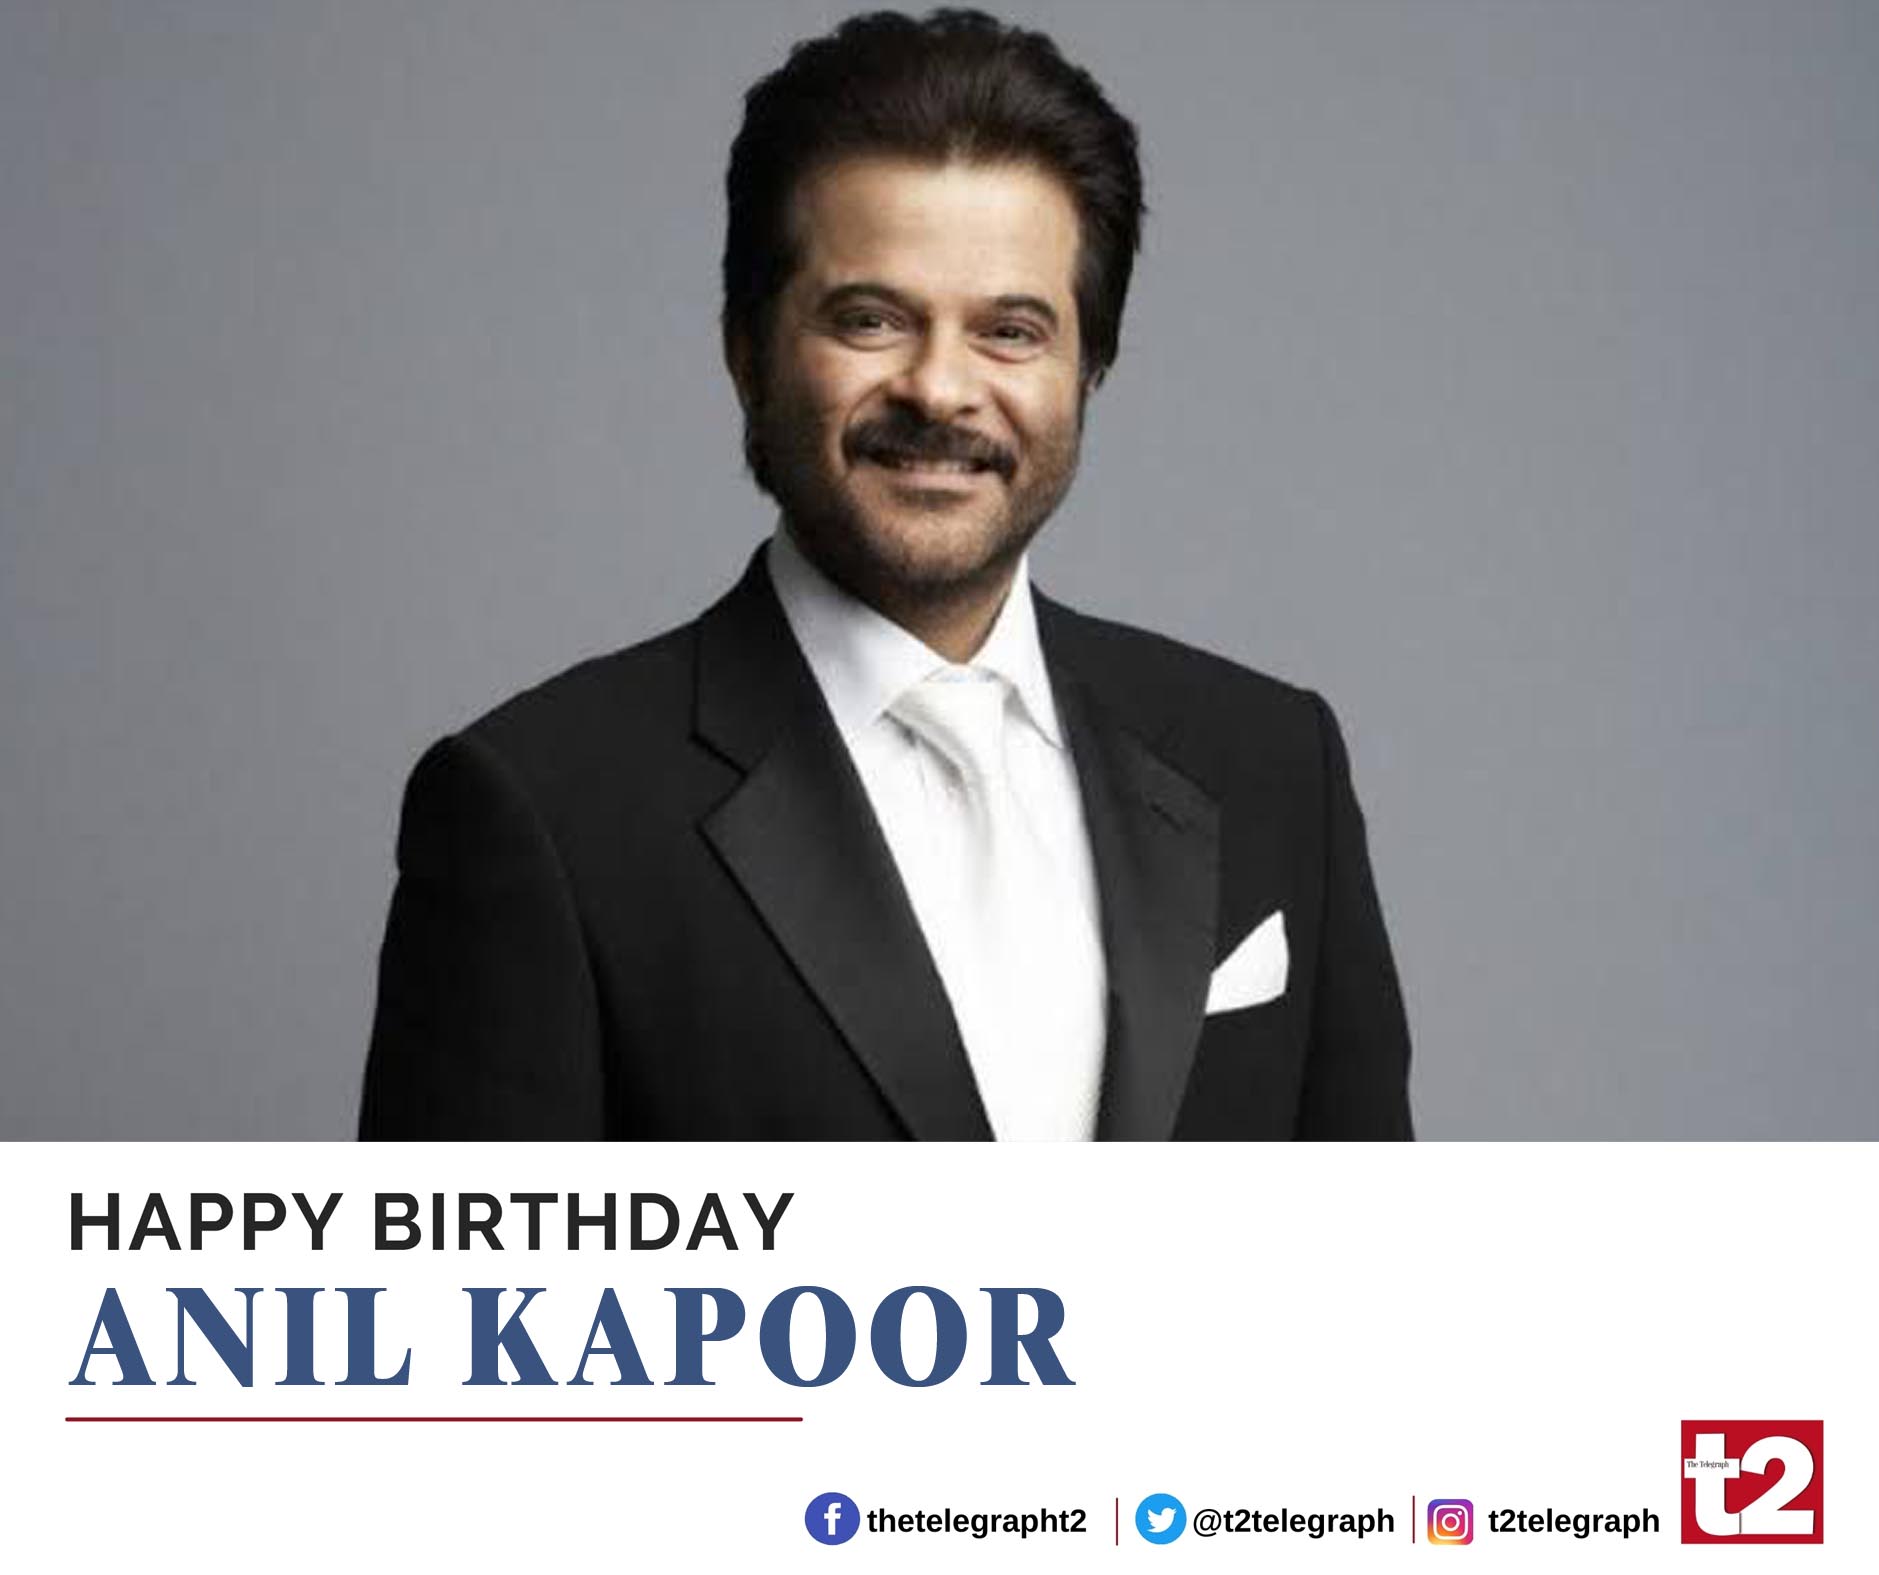 He turns 65 today! How old do you think Anil Kapoor looks? And yes, happy birthday Mr Evergreen! 